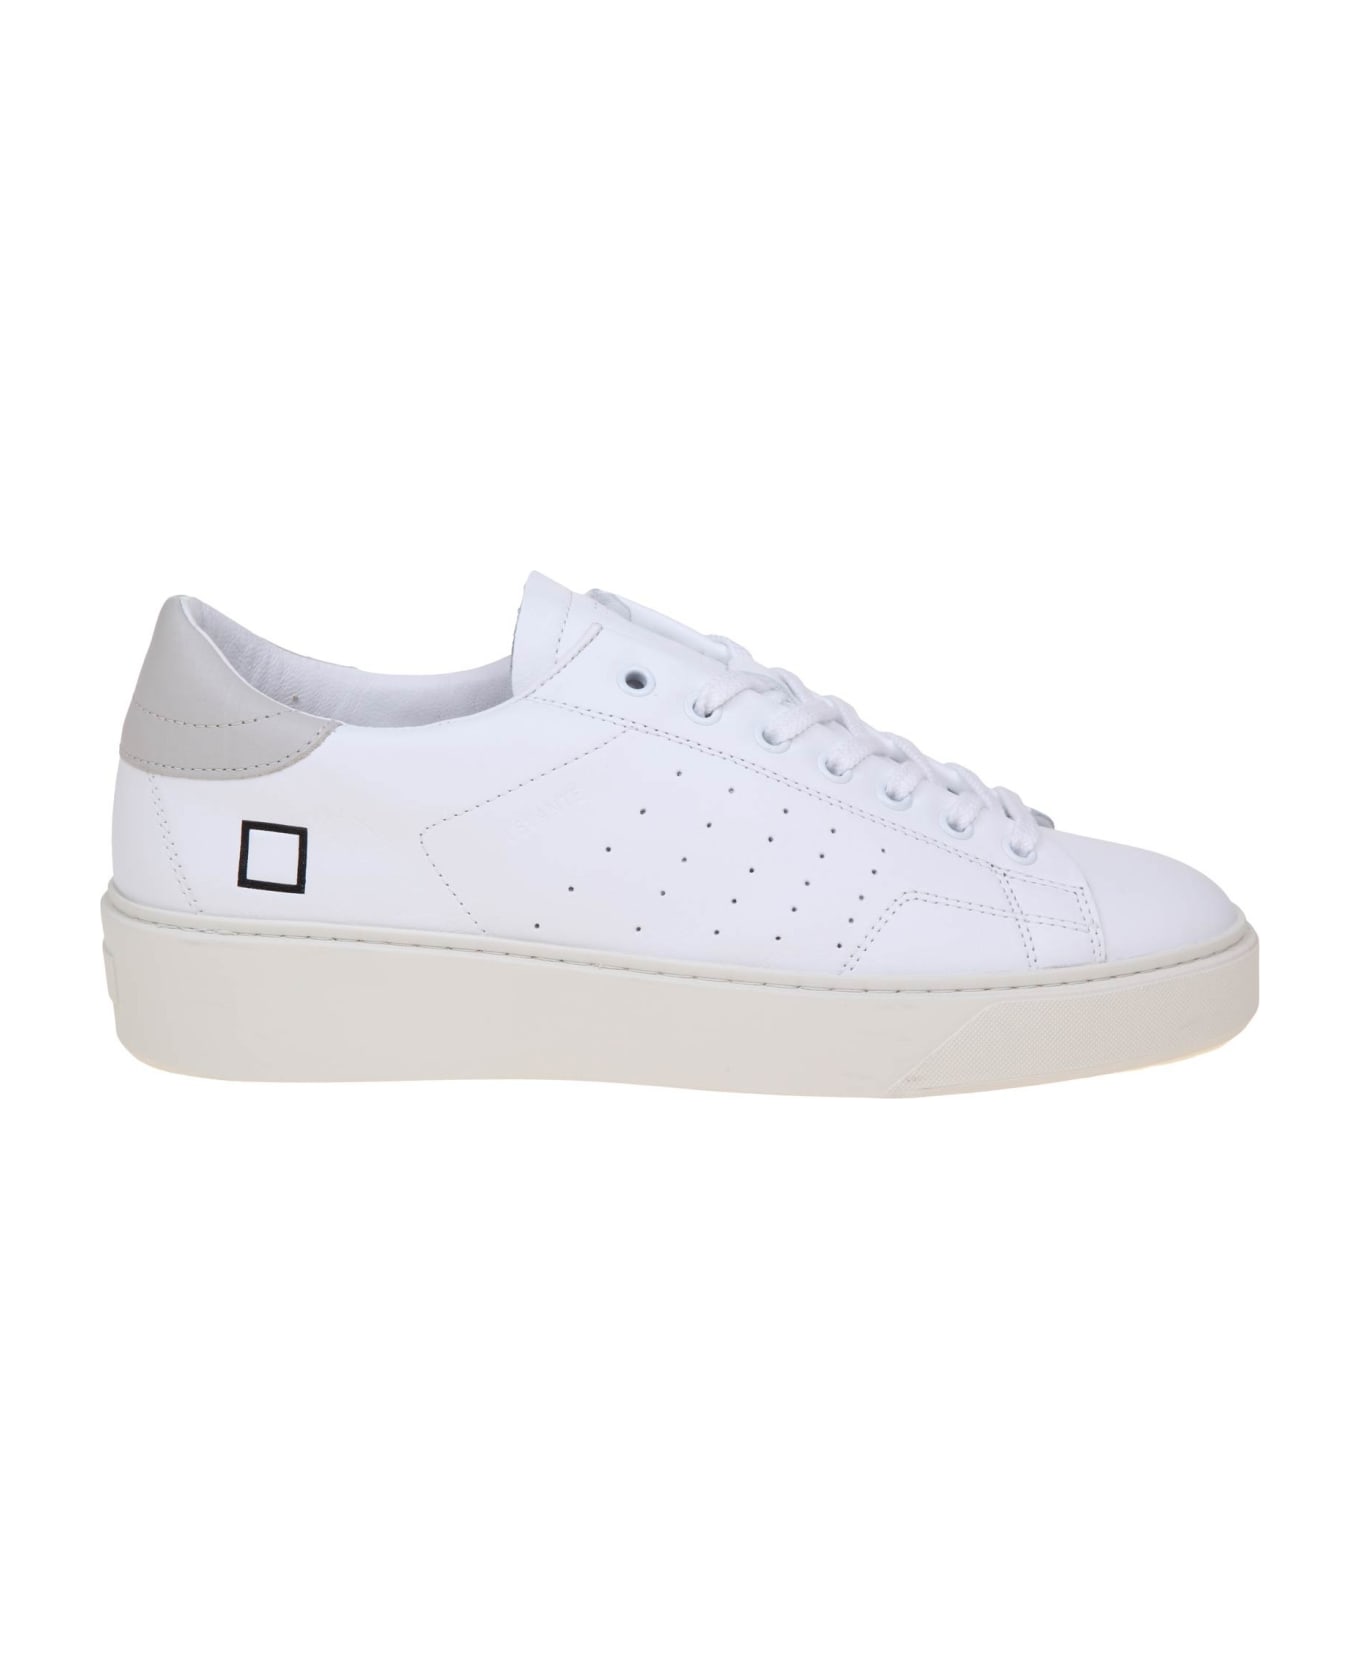 D.A.T.E. Levante In White And Gray Leather - White/Grey